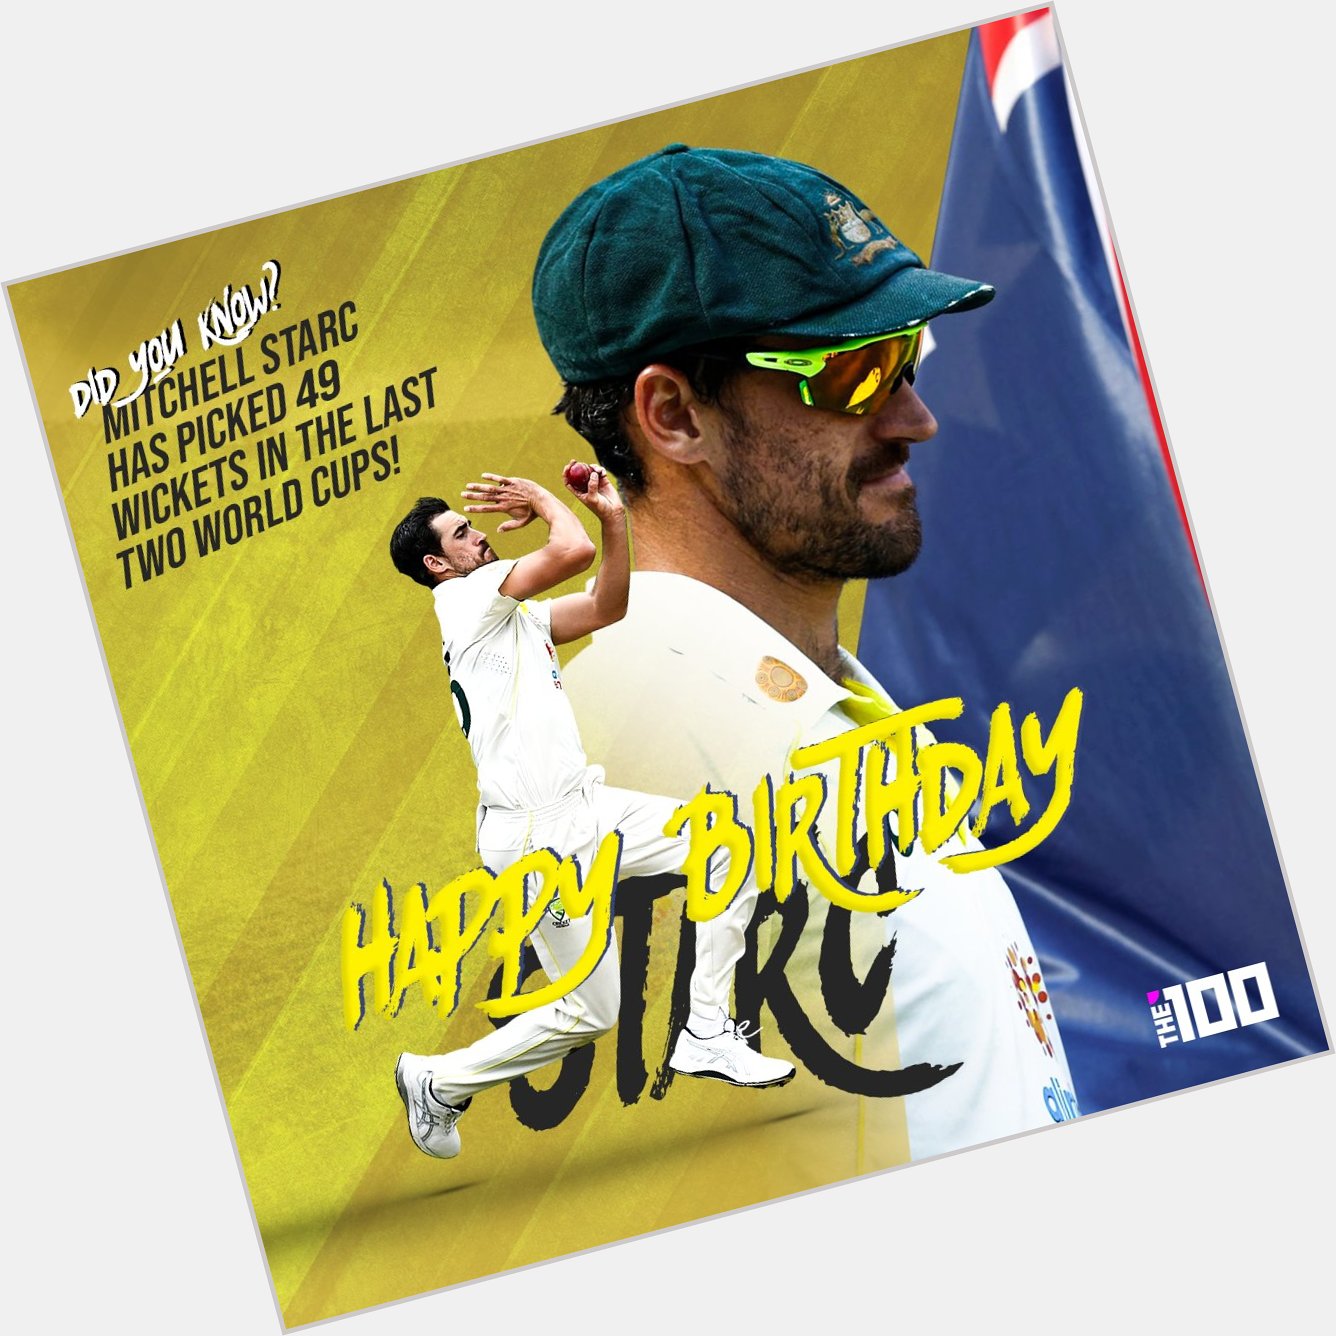 Happy Birthday Mitchell Starc have a great year ahead    